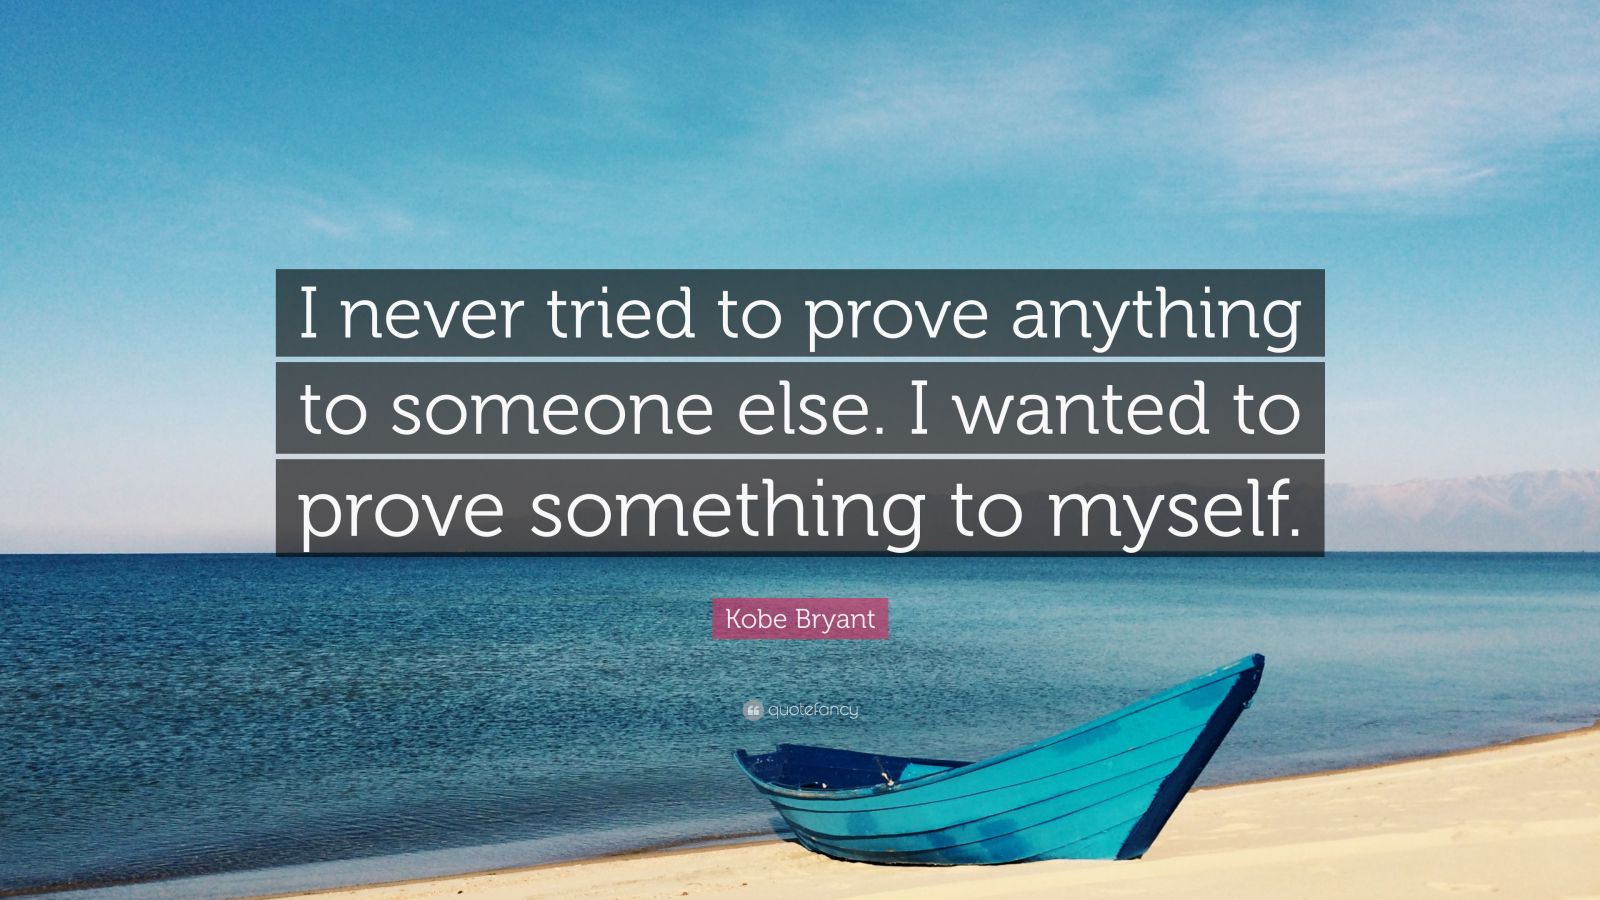 Kobe Bryant Quote: “I never tried to prove anything to someone else. I ...